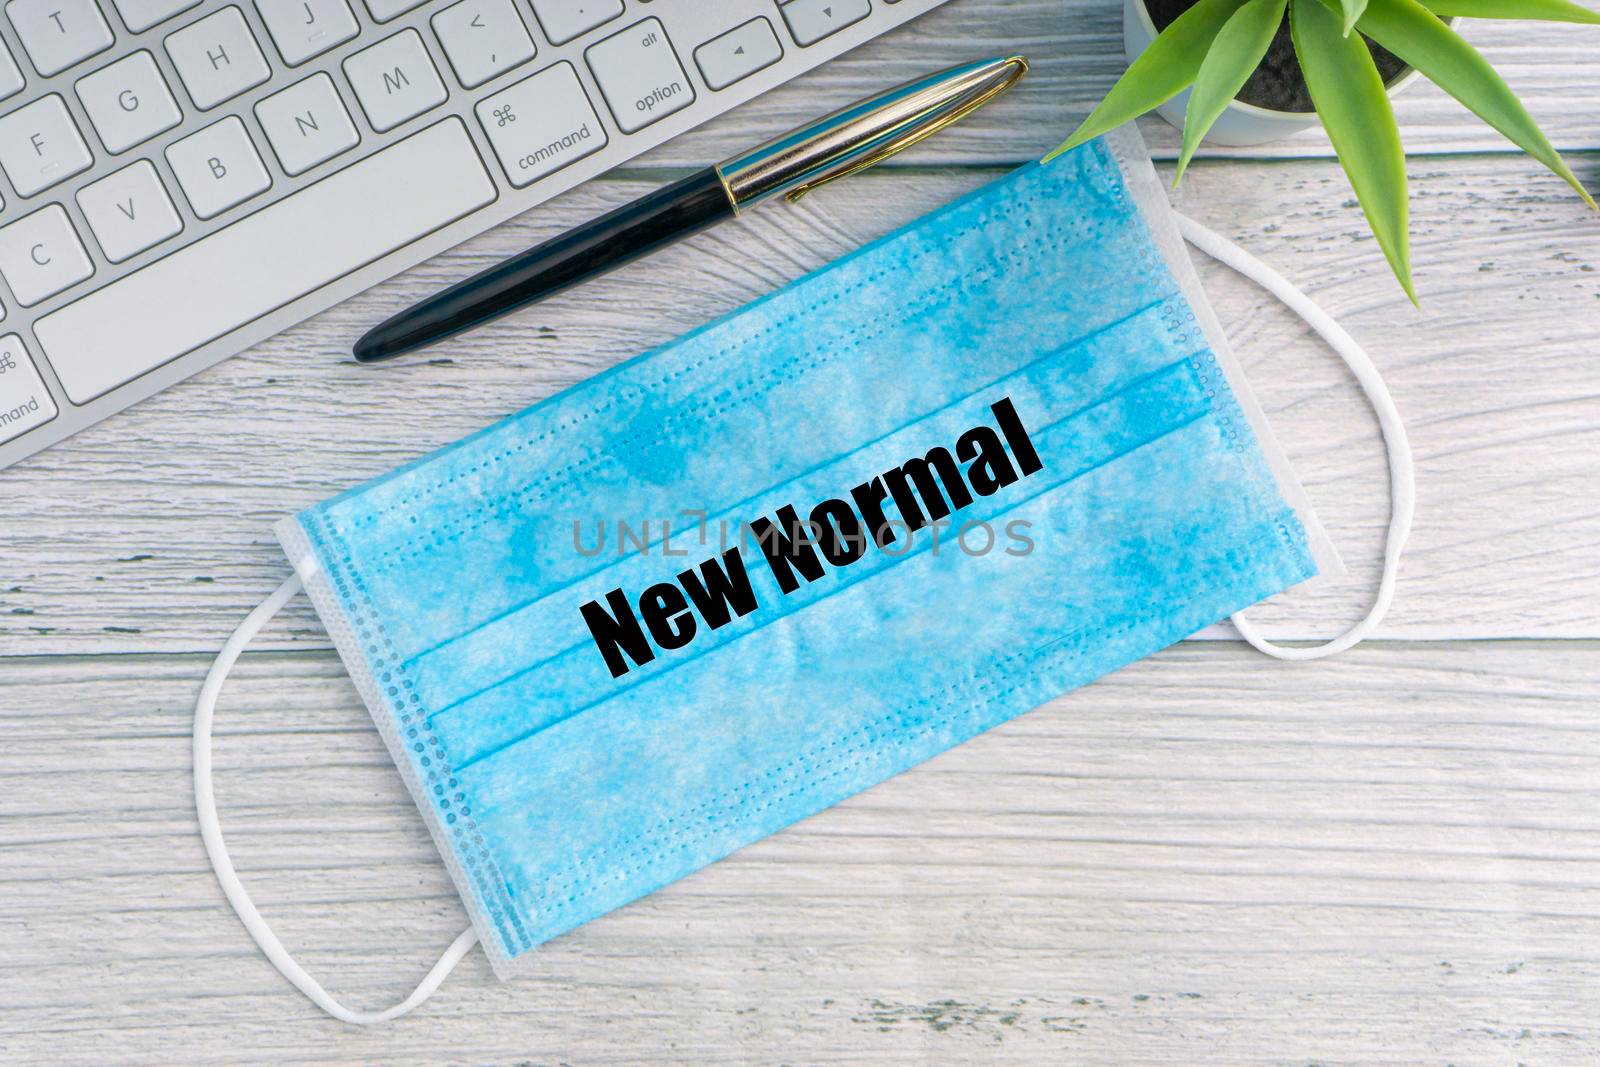 NEW NORMAL text with safety face mask, keyboard, fountain pen and decorative plant on wooden background by silverwings